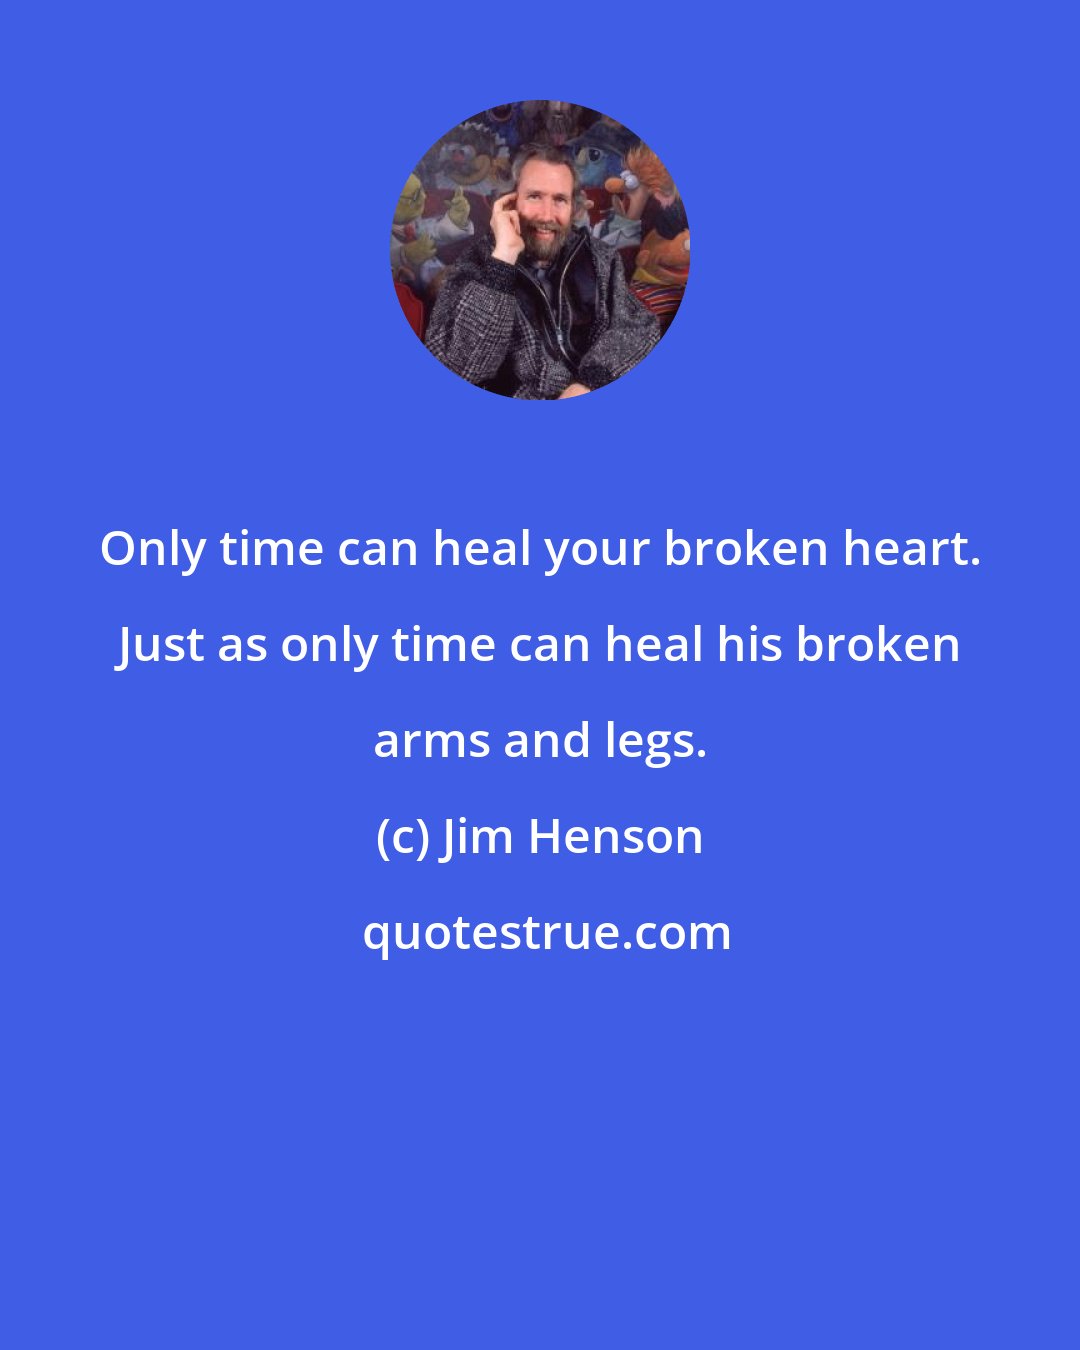 Jim Henson: Only time can heal your broken heart. Just as only time can heal his broken arms and legs.